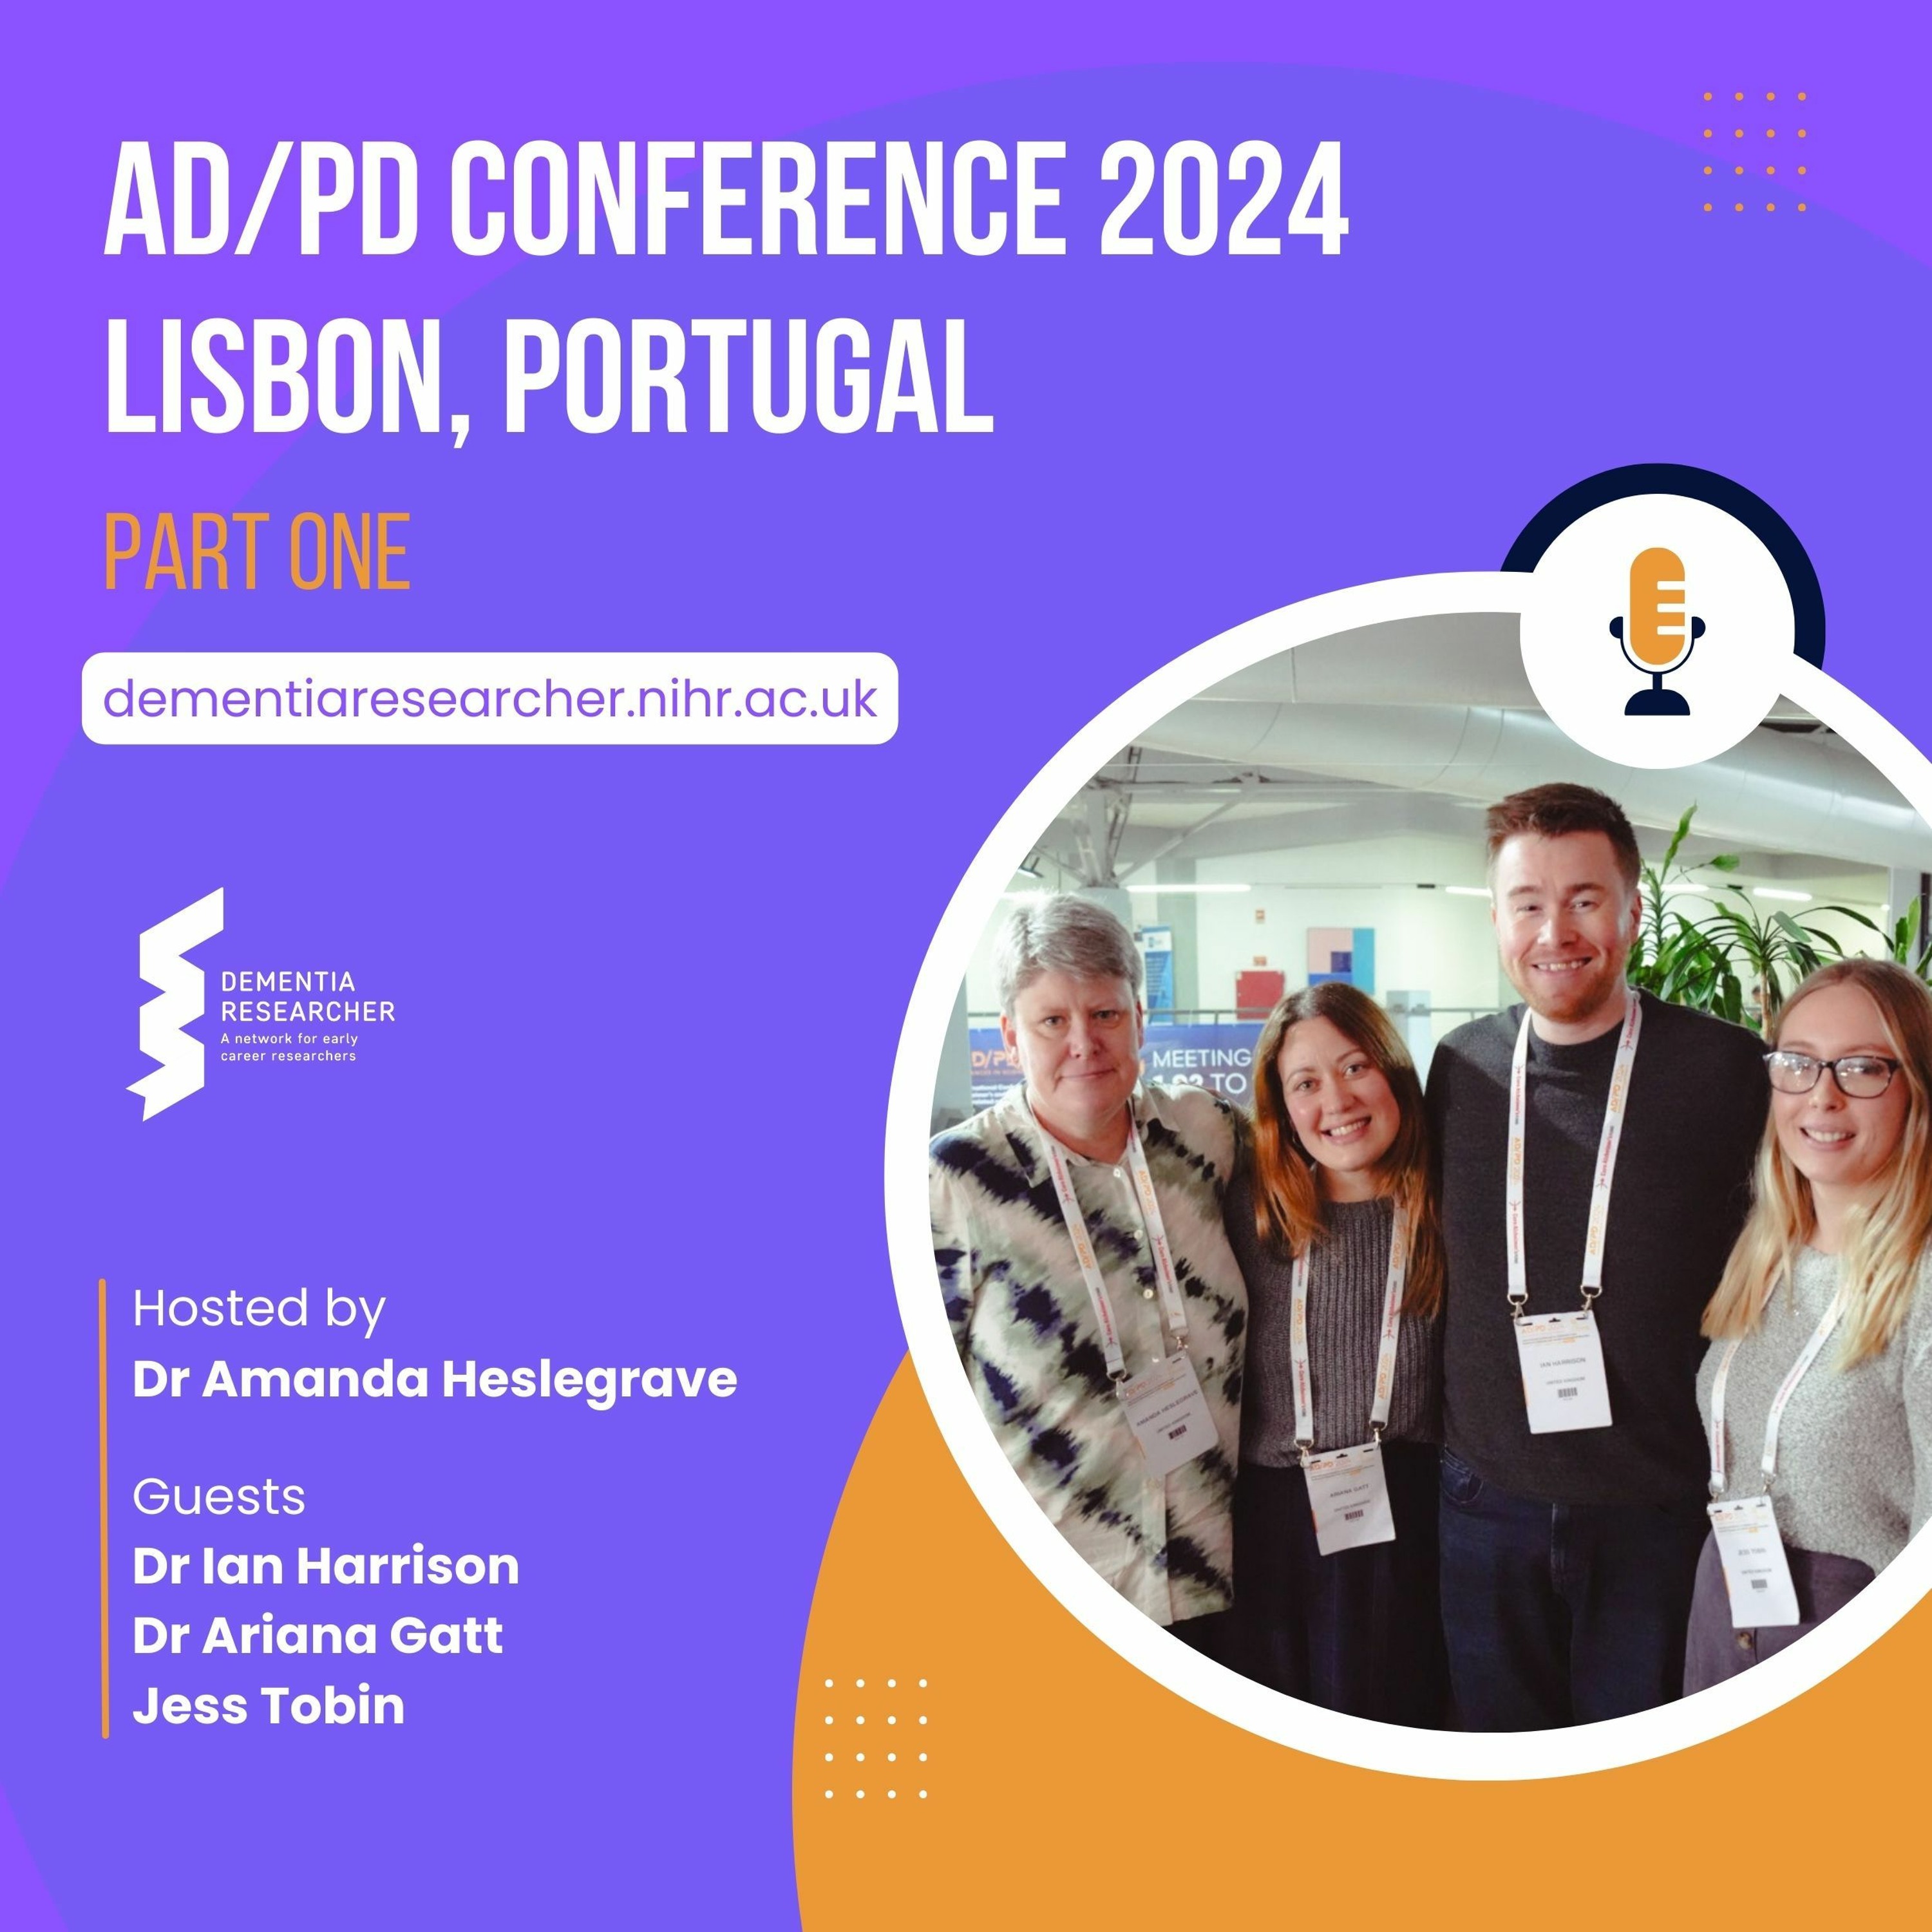 ADPD 2024 Conference Highlights - Part 1